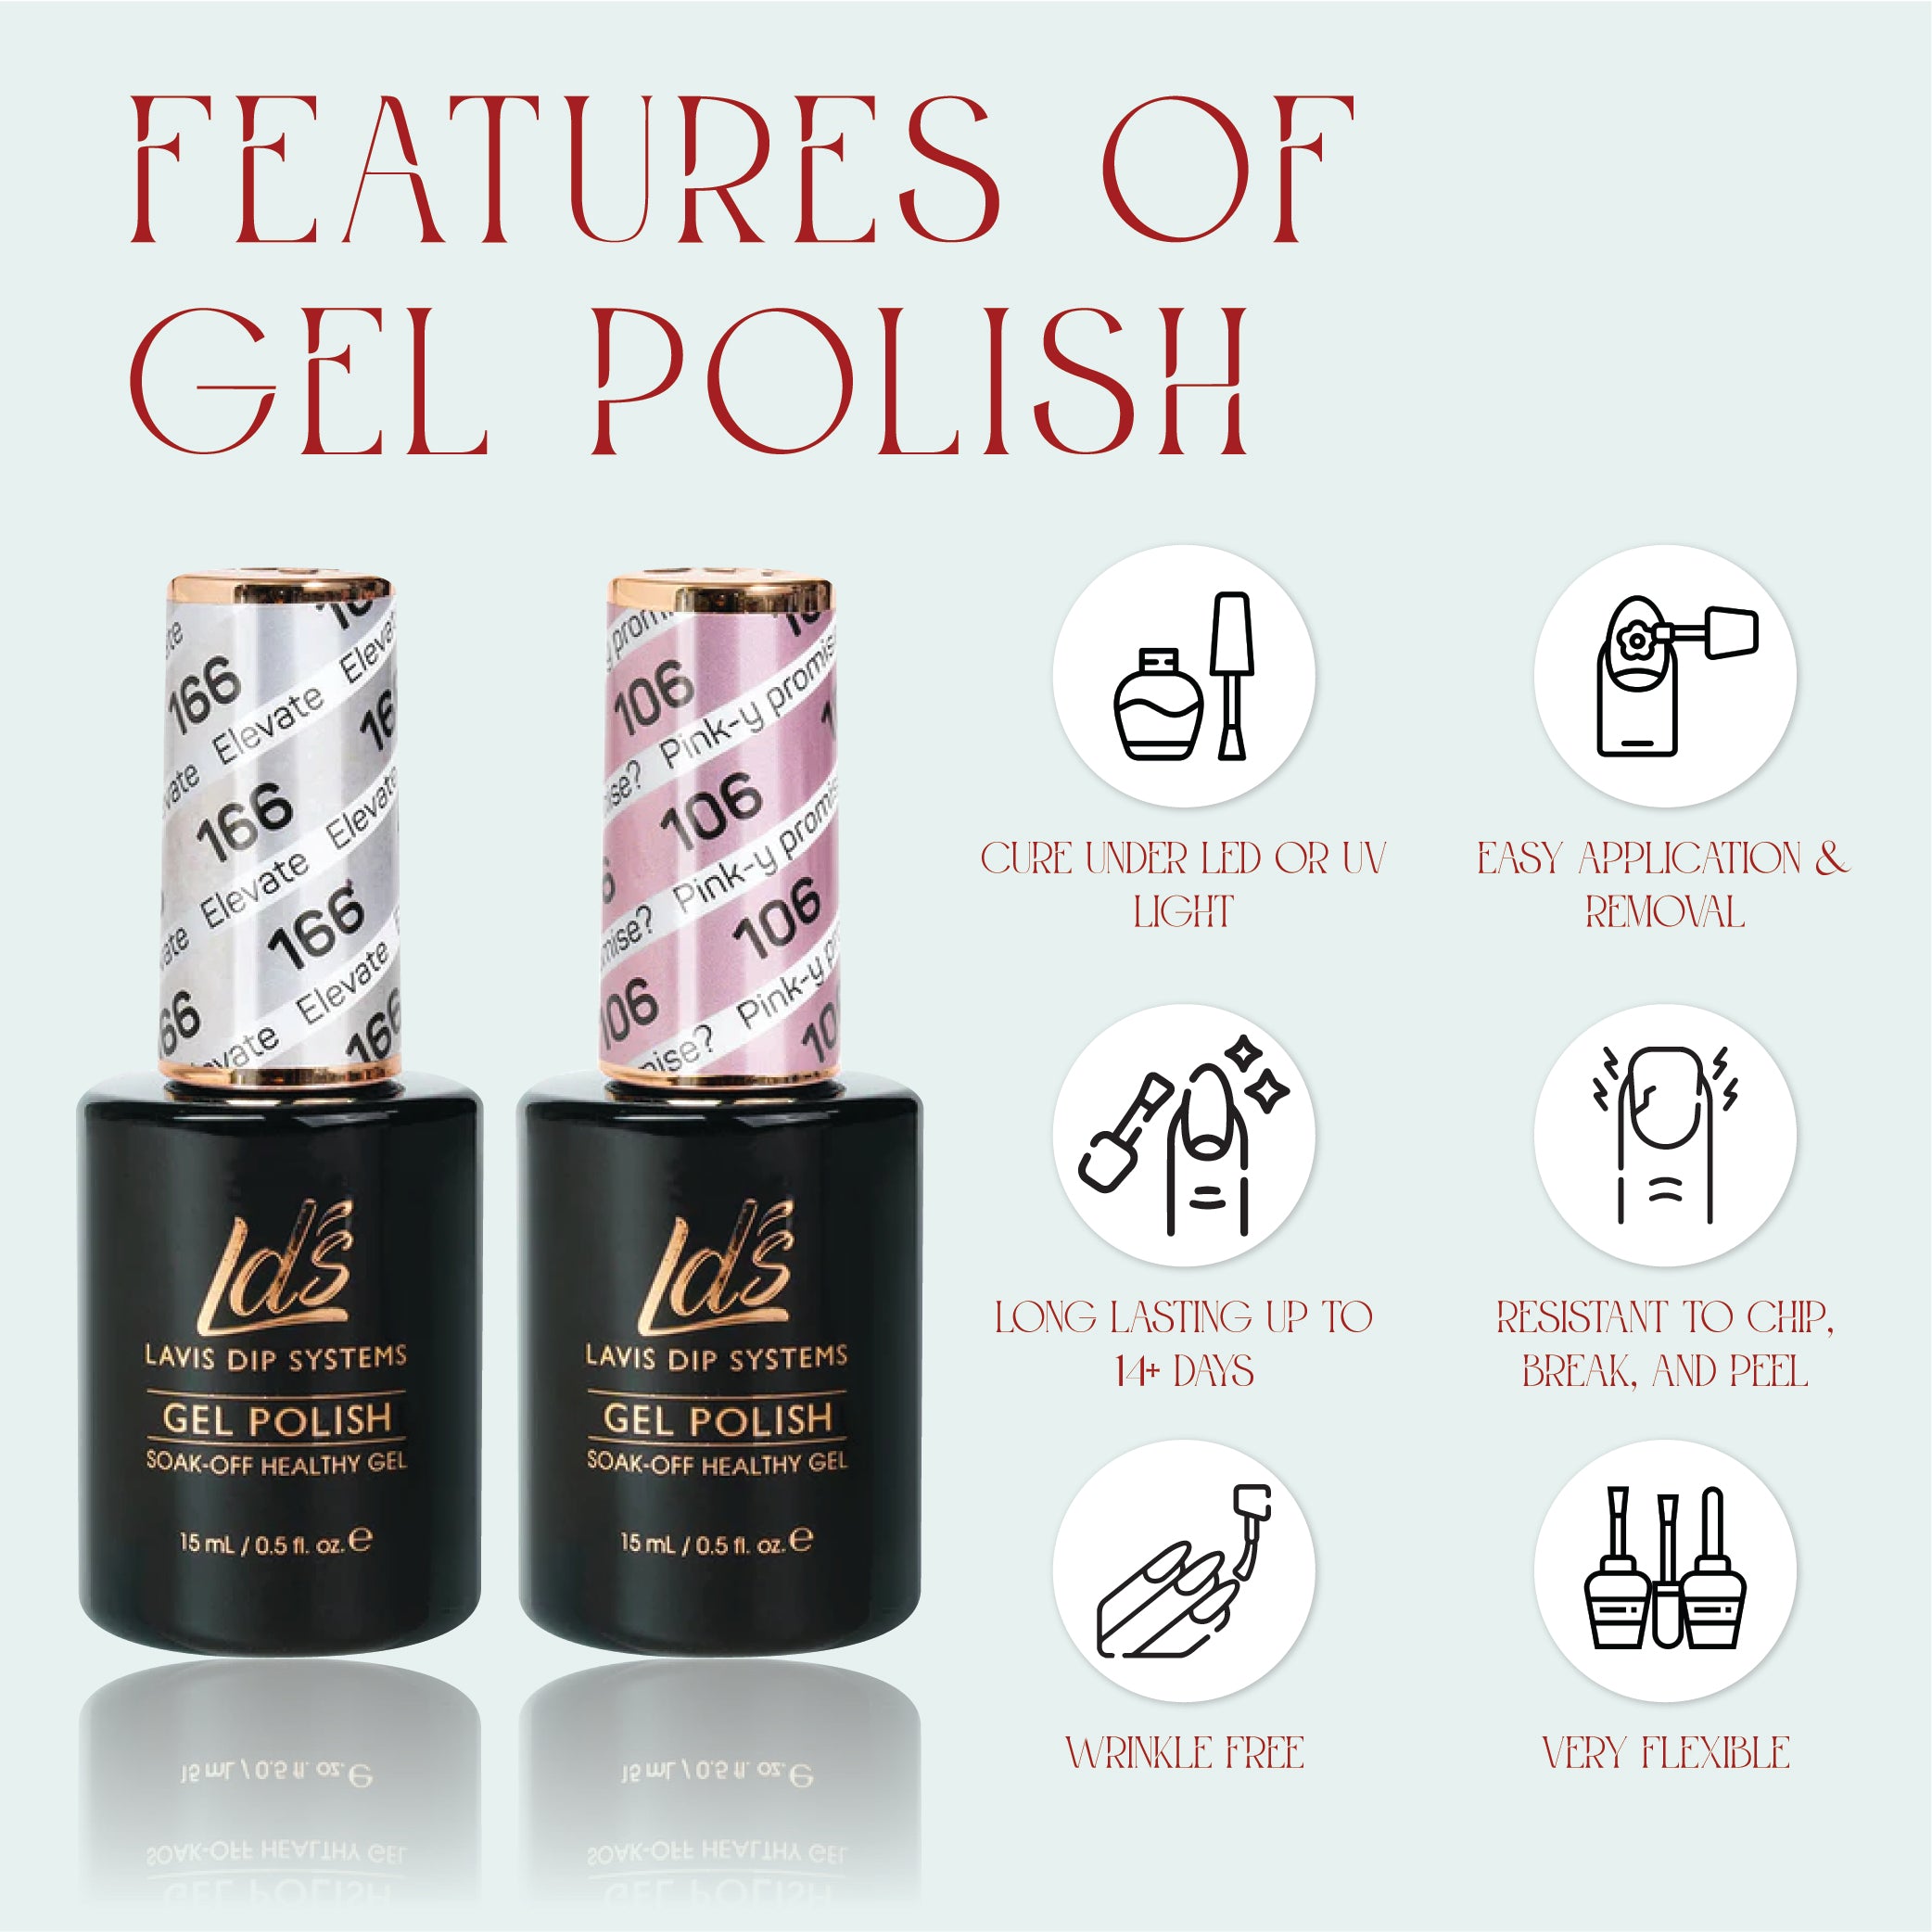 LDS 153 Make Yourself A Priority - LDS Healthy Gel Polish & Matching Nail Lacquer Duo Set - 0.5oz